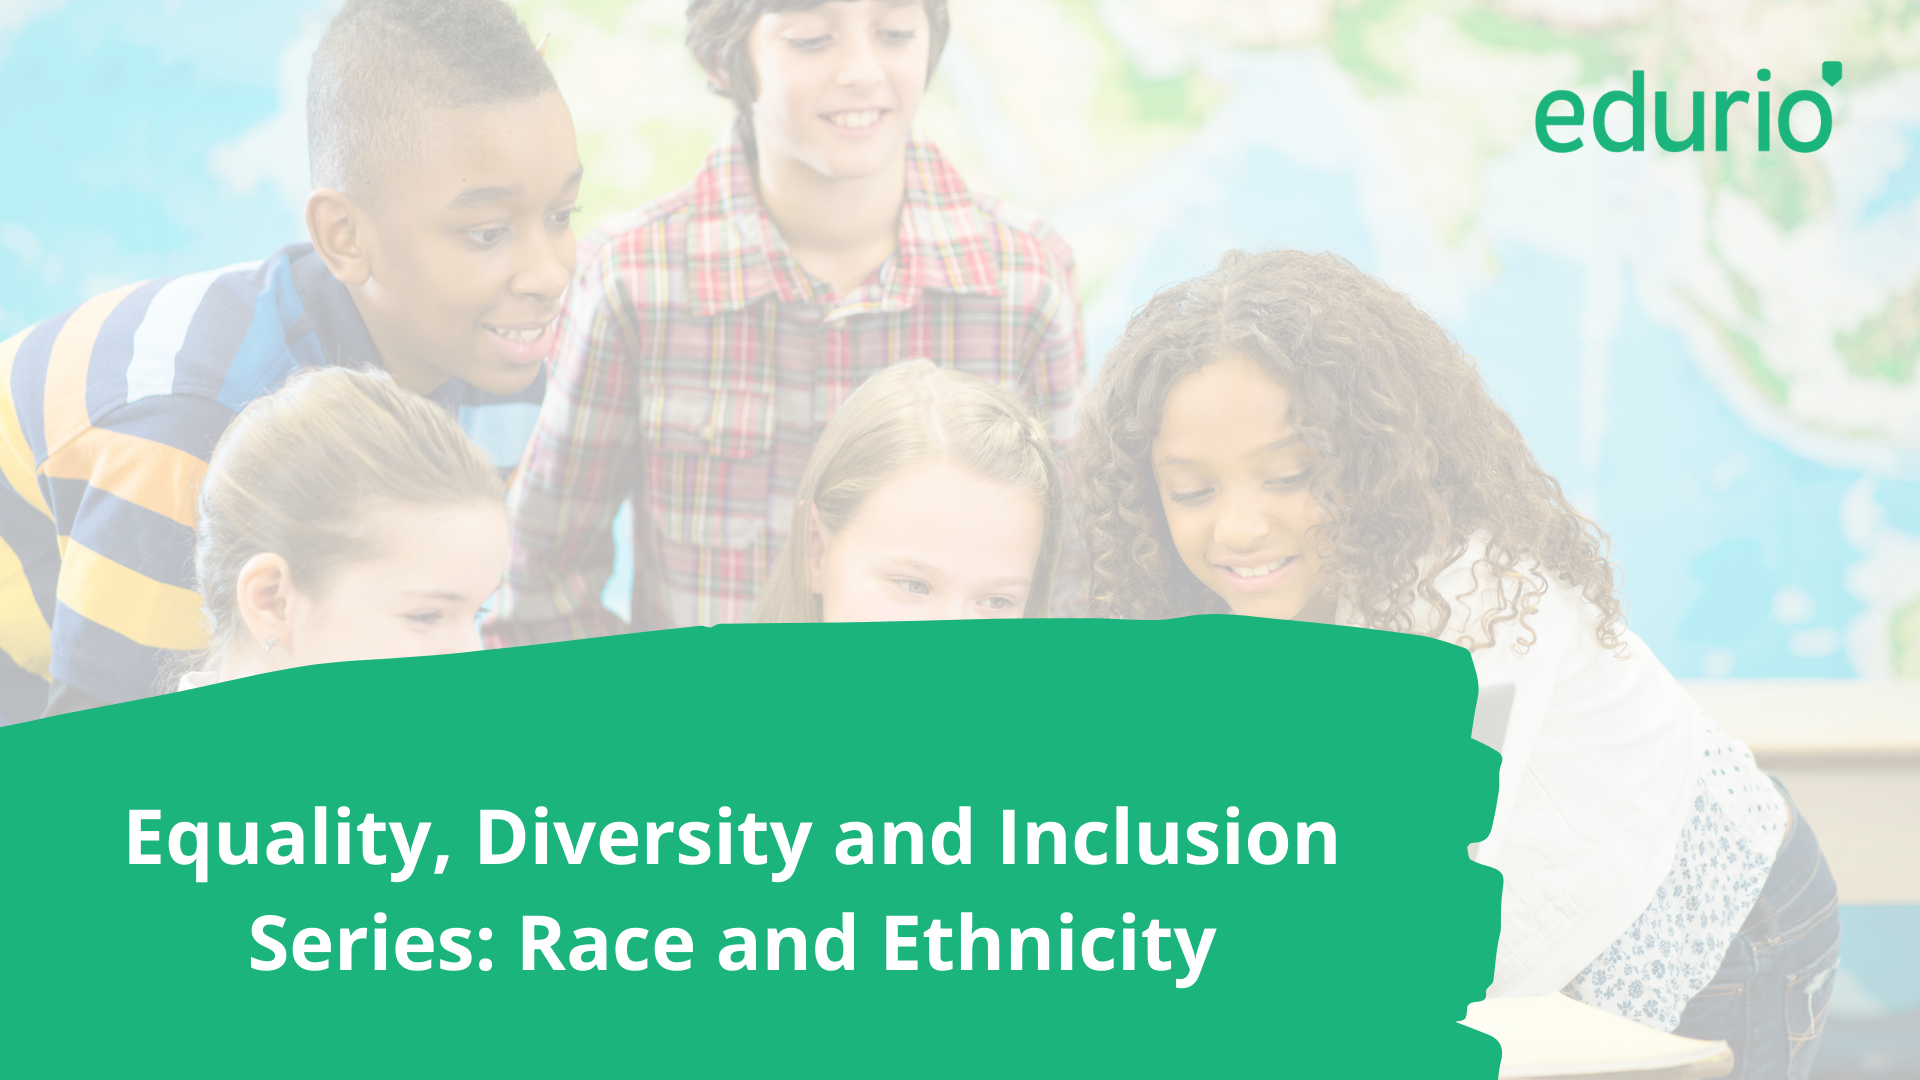 Equality, Diversity and Inclusion series: Race and Ethnicity